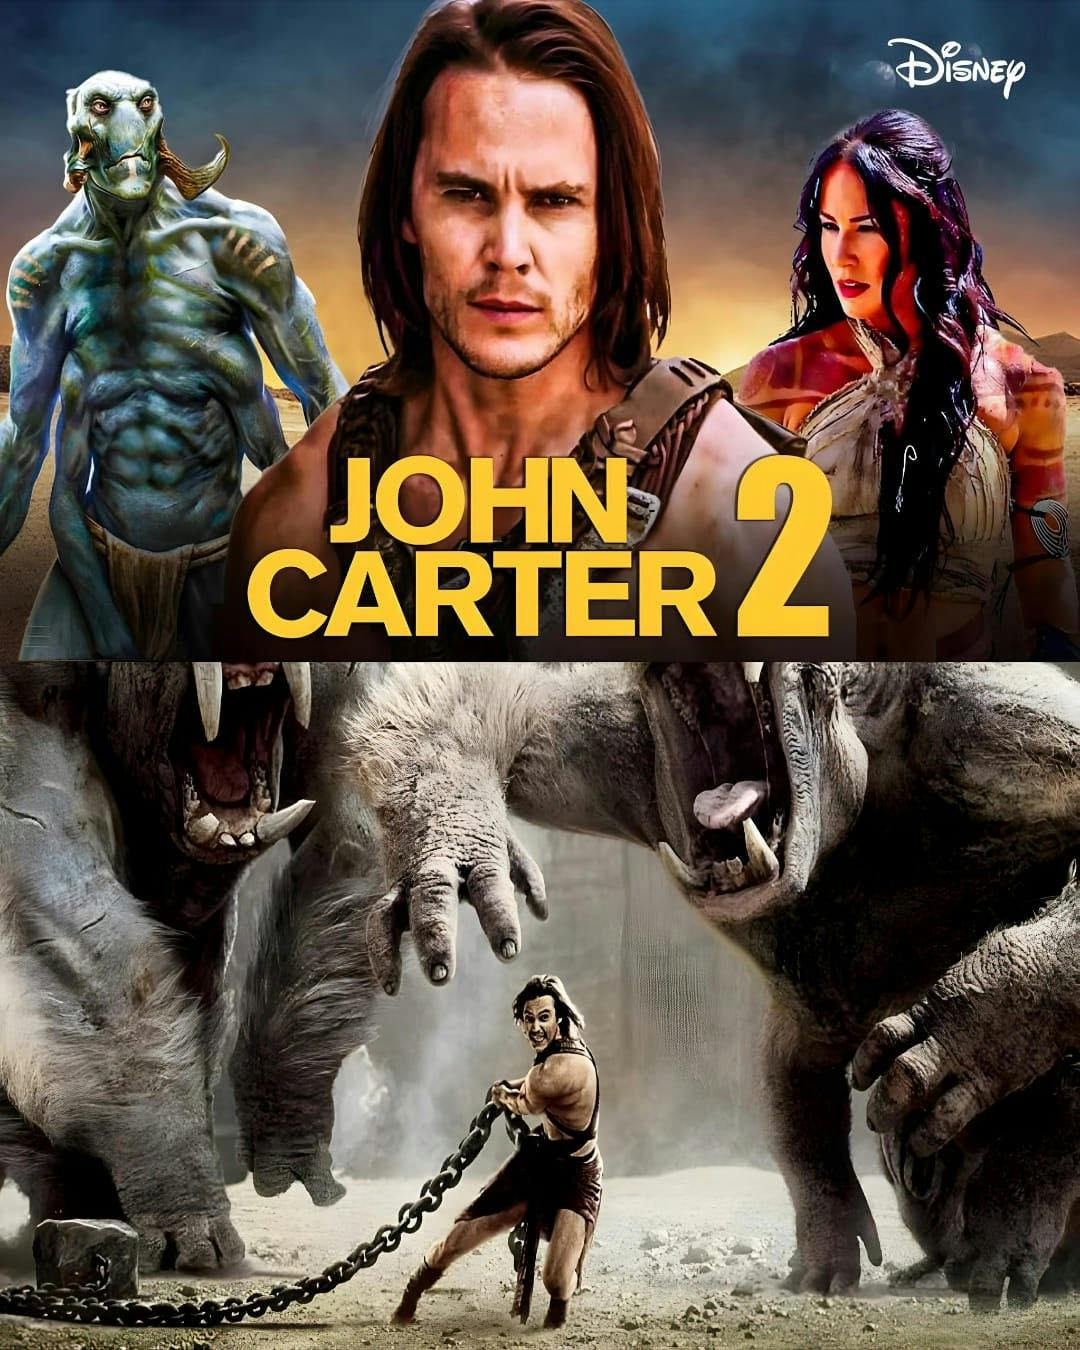 Cover Image for JOHN CARTER 2 Teaser (2024) With Taylor Kitsch & Lynn Collins